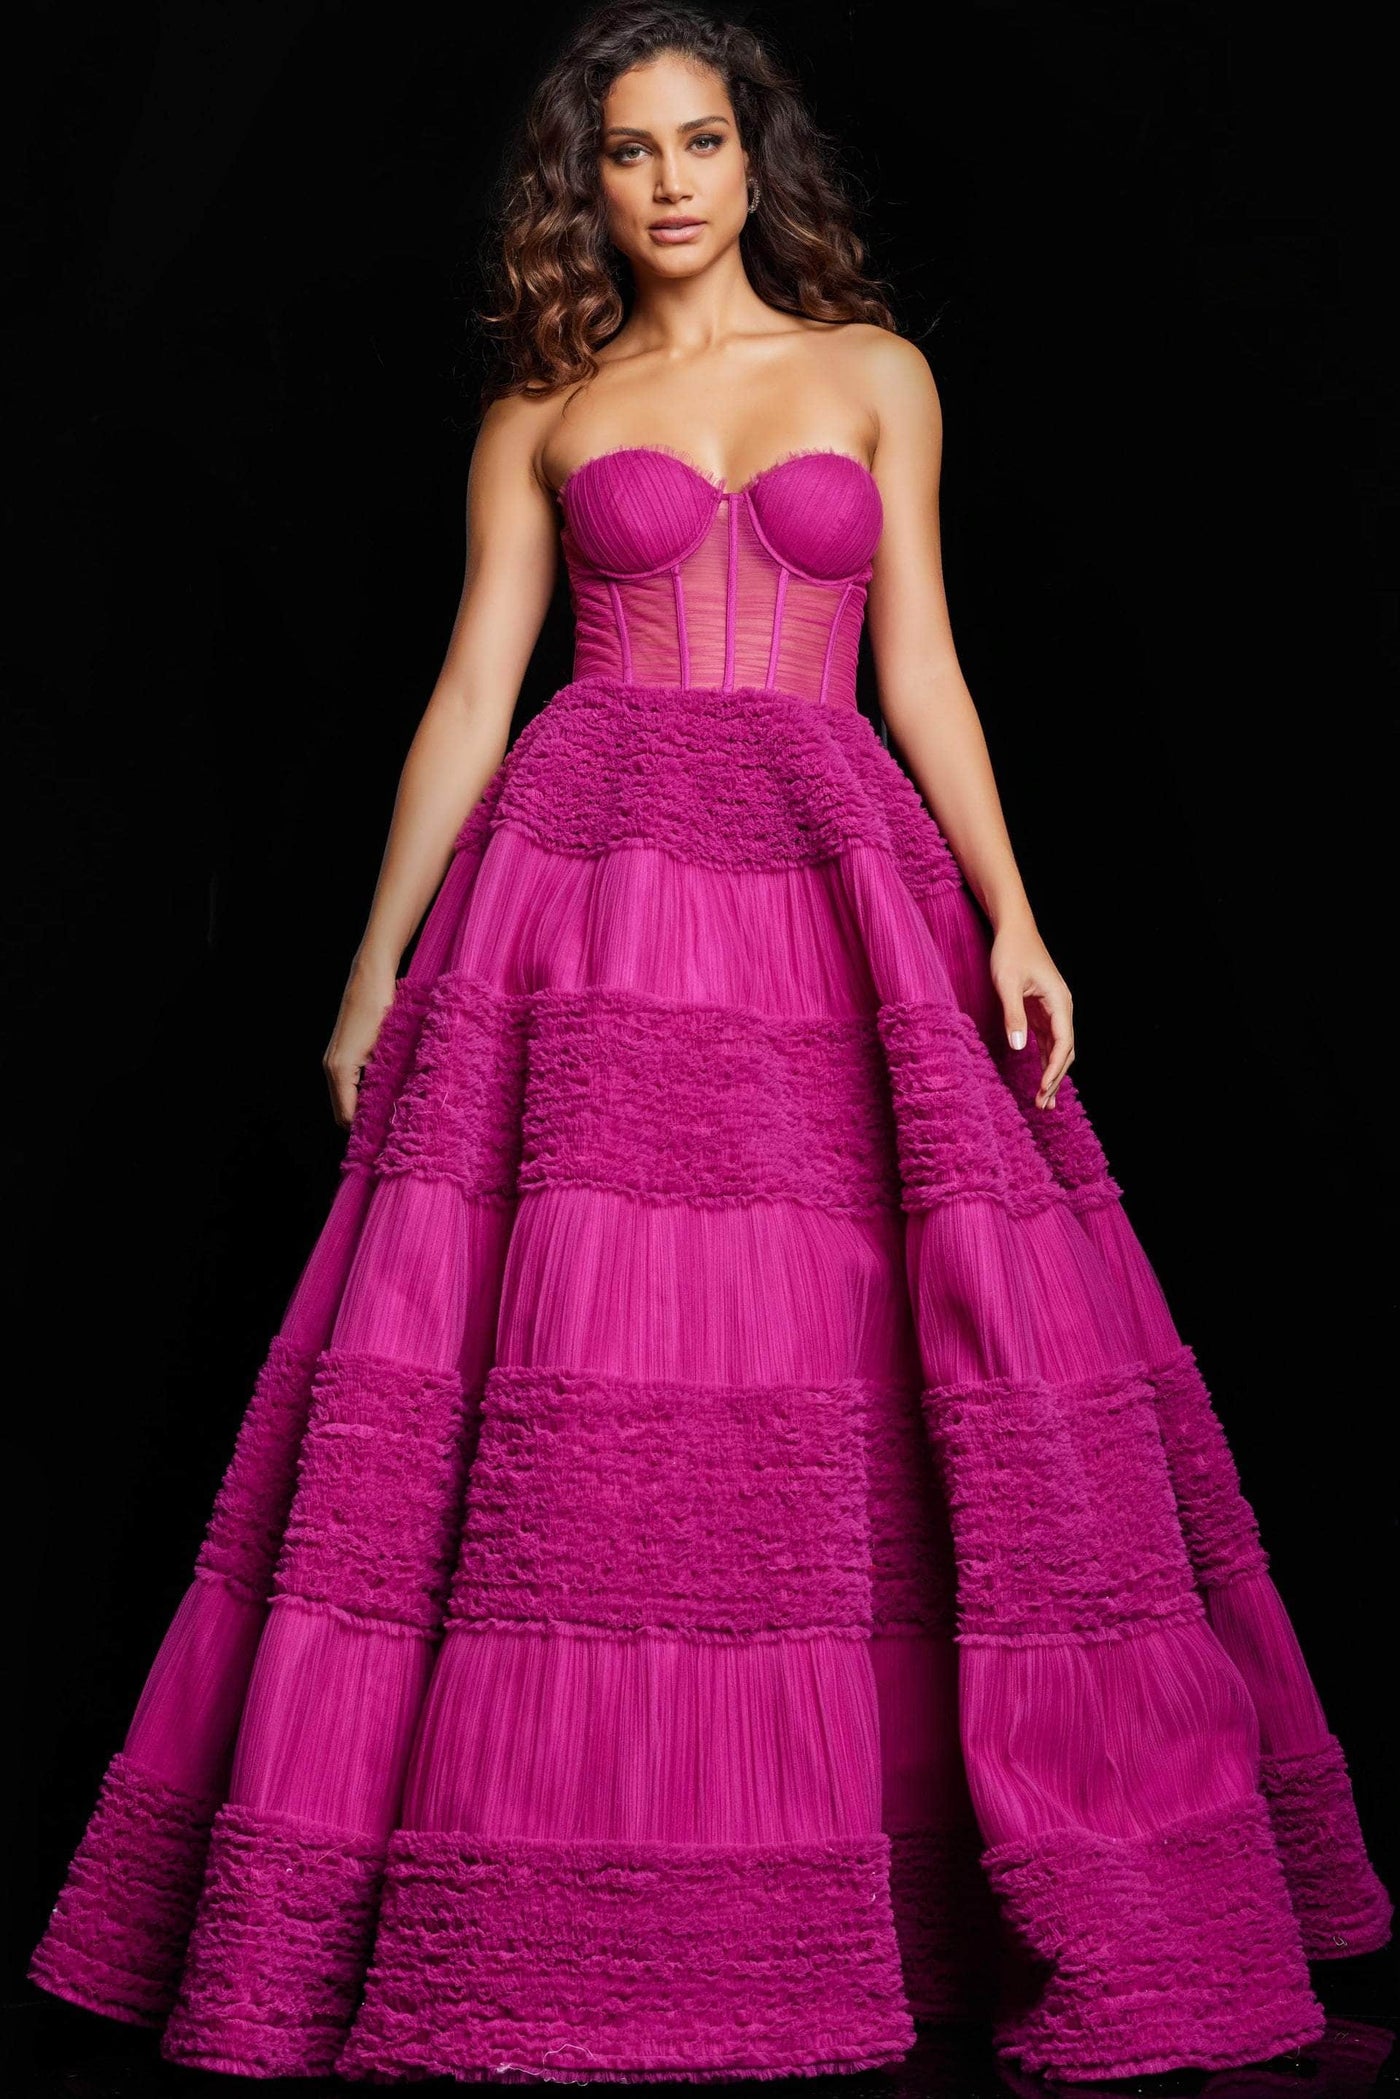 Jovani 37157 - Bustier Textured Evening Gown Special Occasion Dress 00 / Raspberry